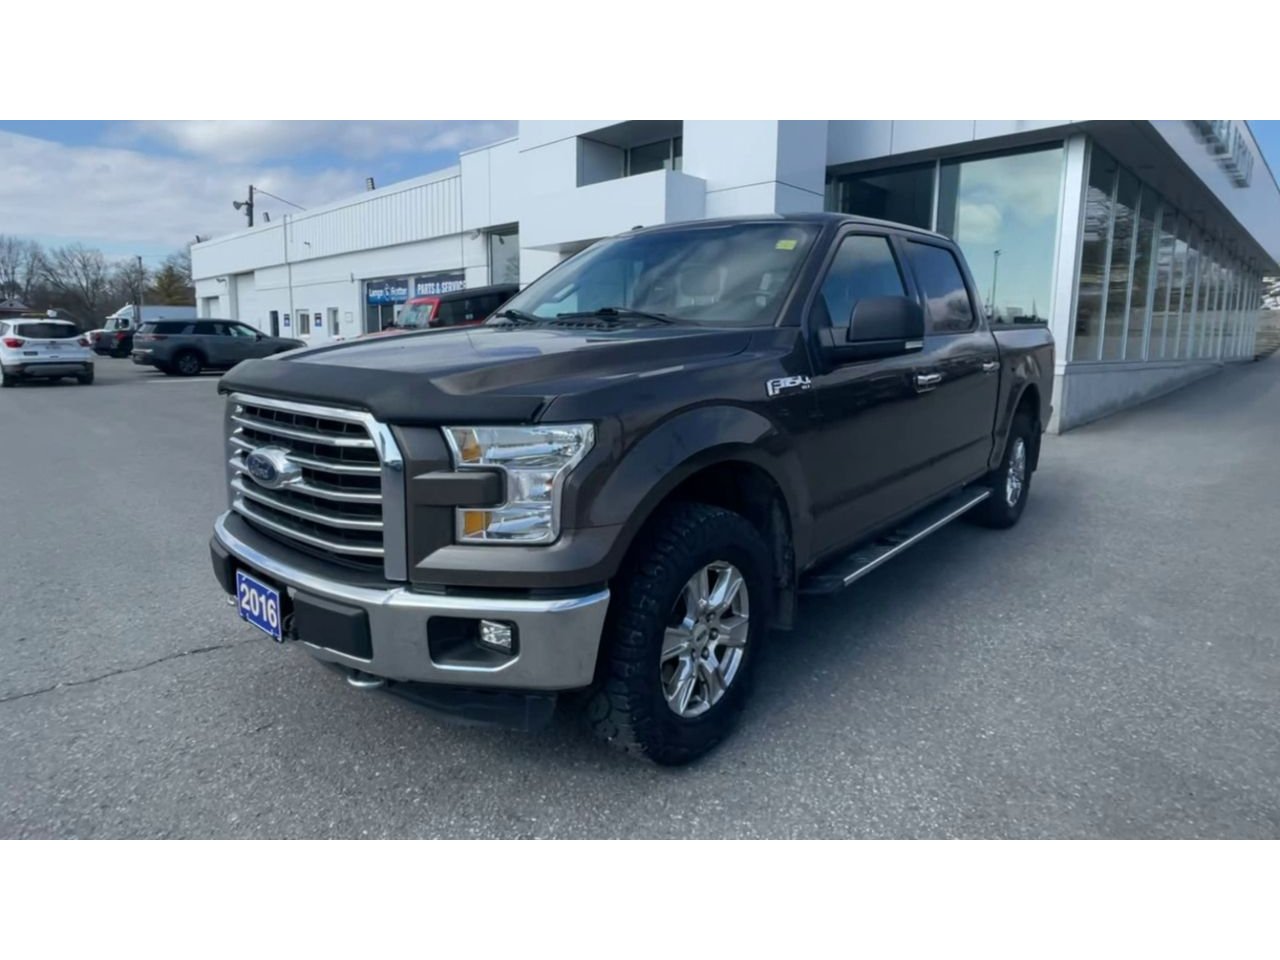 2016 Ford F-150 - 21783A Full Image 4